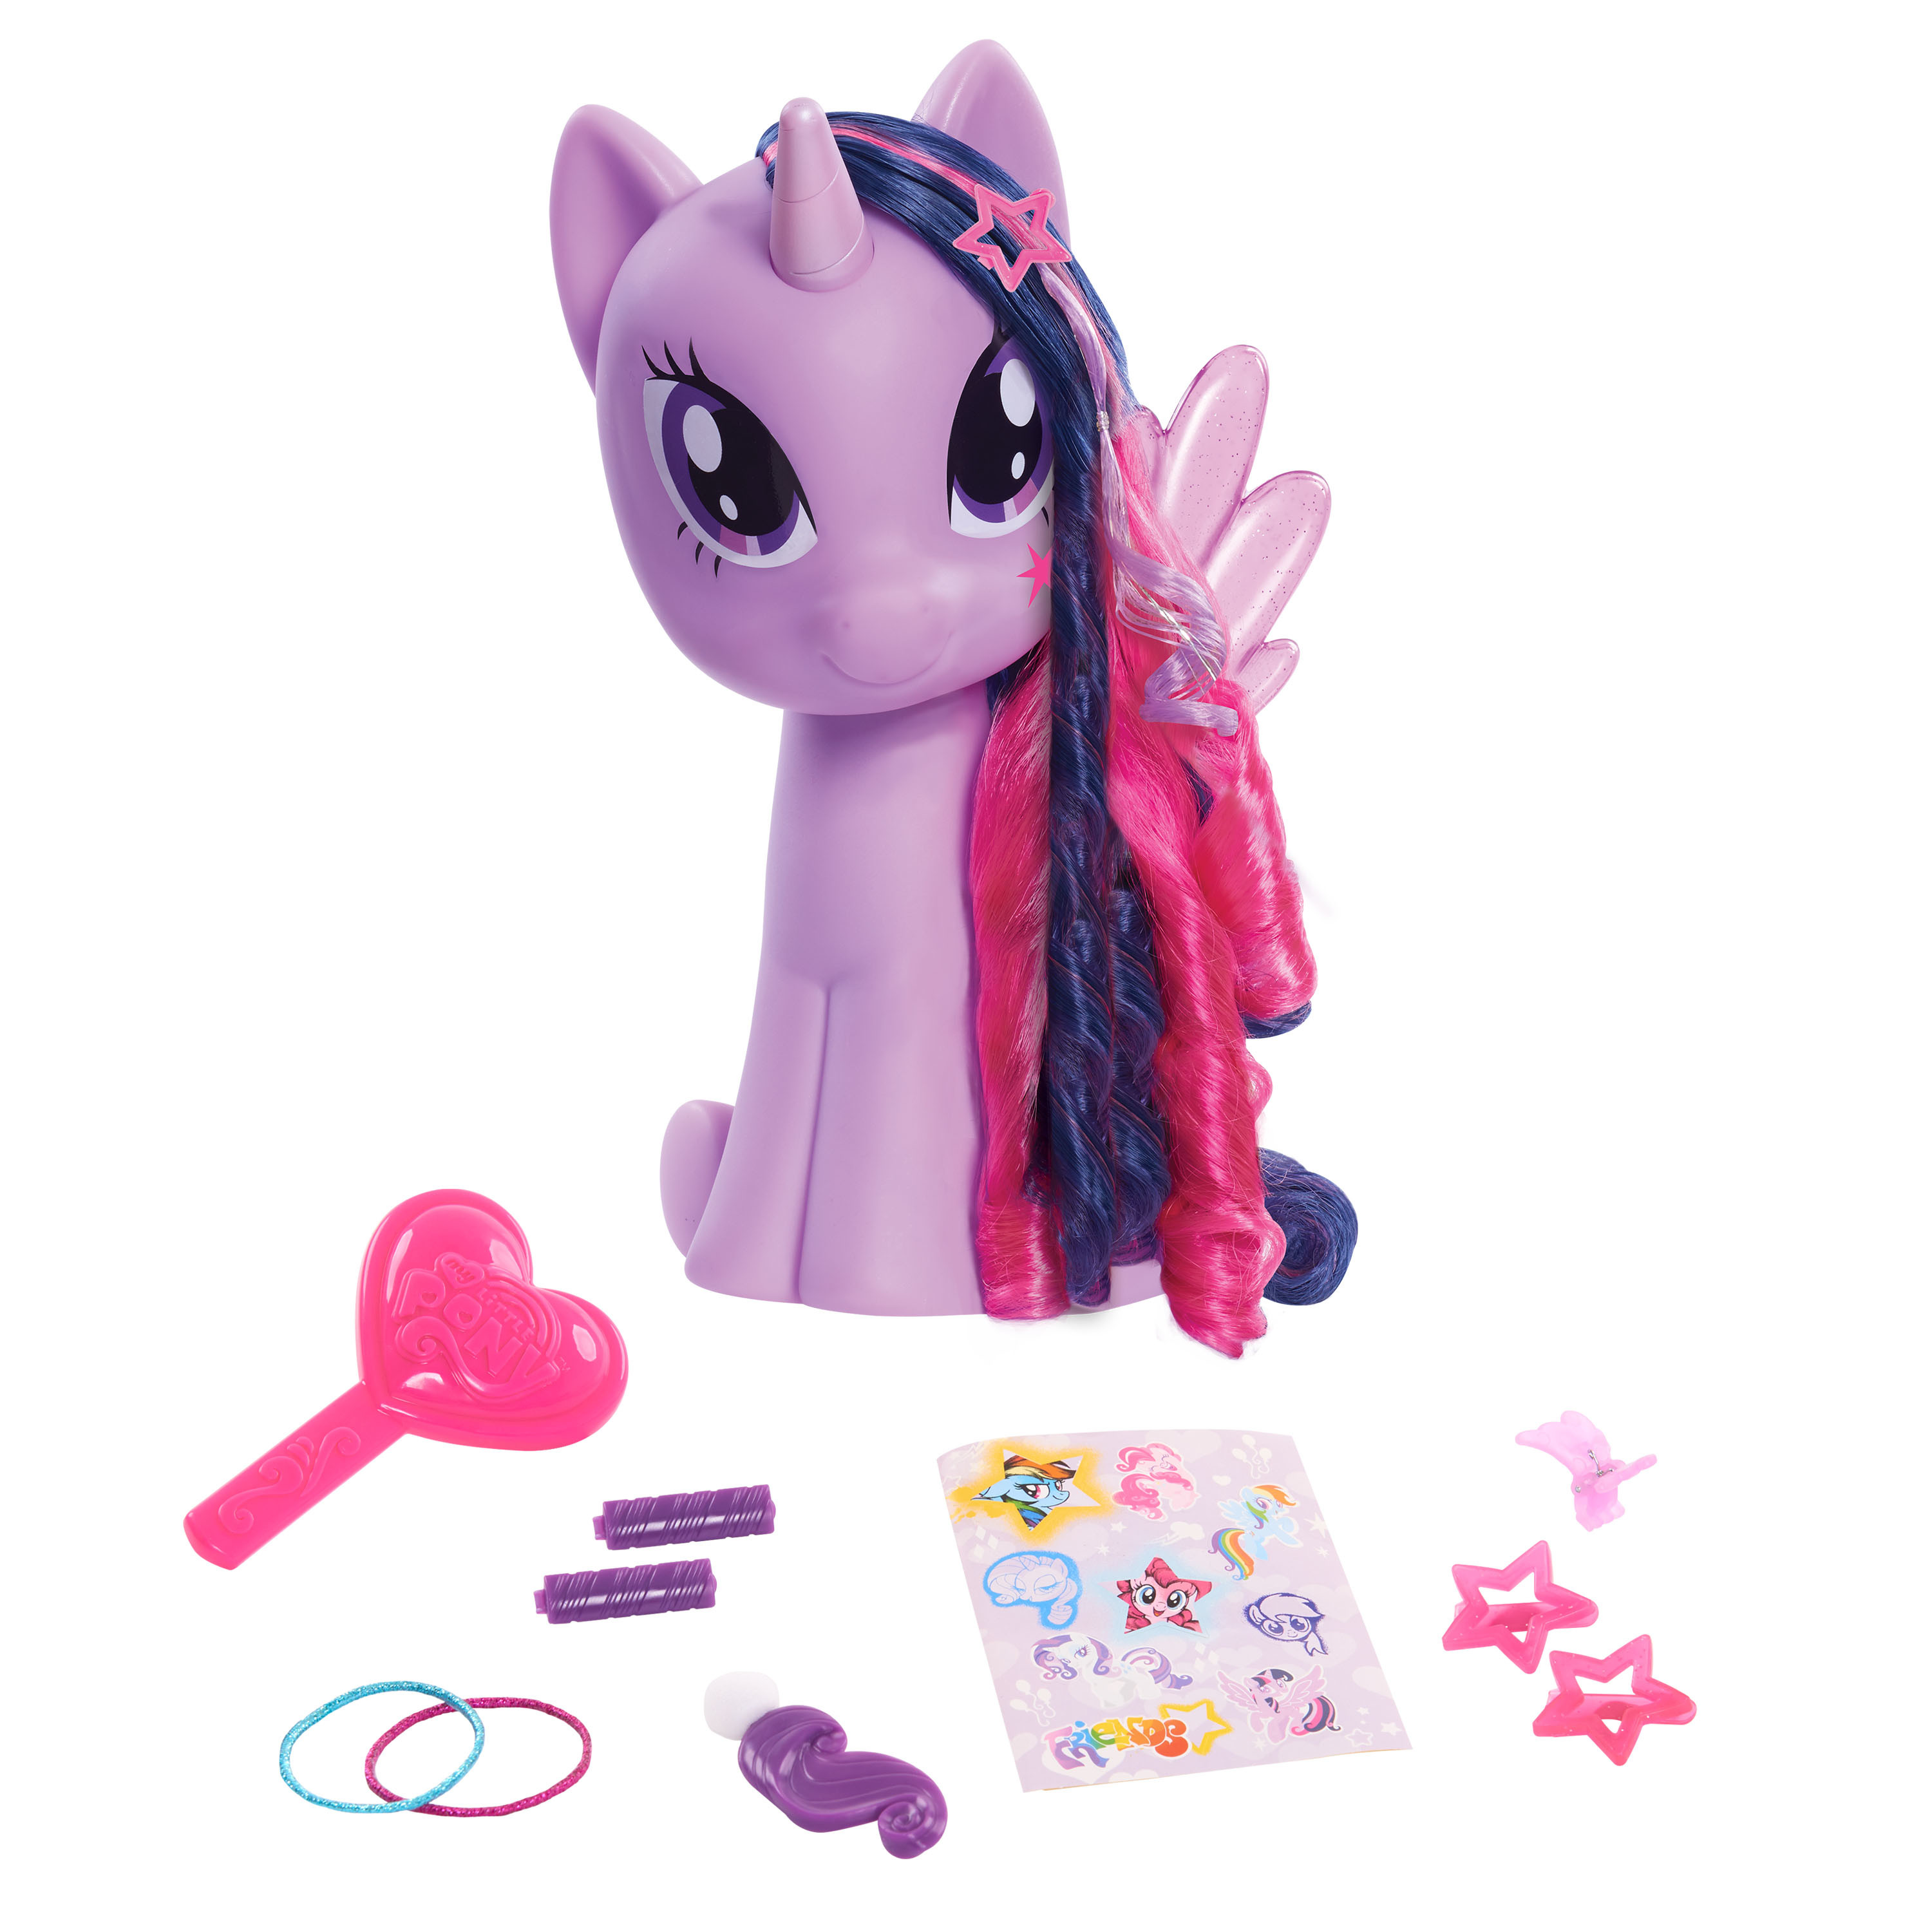 My Little Pony Twilight Sparkle Styling Head with Color Change, 12 Pieces, Purple Unicorn, Pretend Play Toys for Girls,  Kids Toys for Ages 3 Up, Gifts and Presents - image 3 of 3